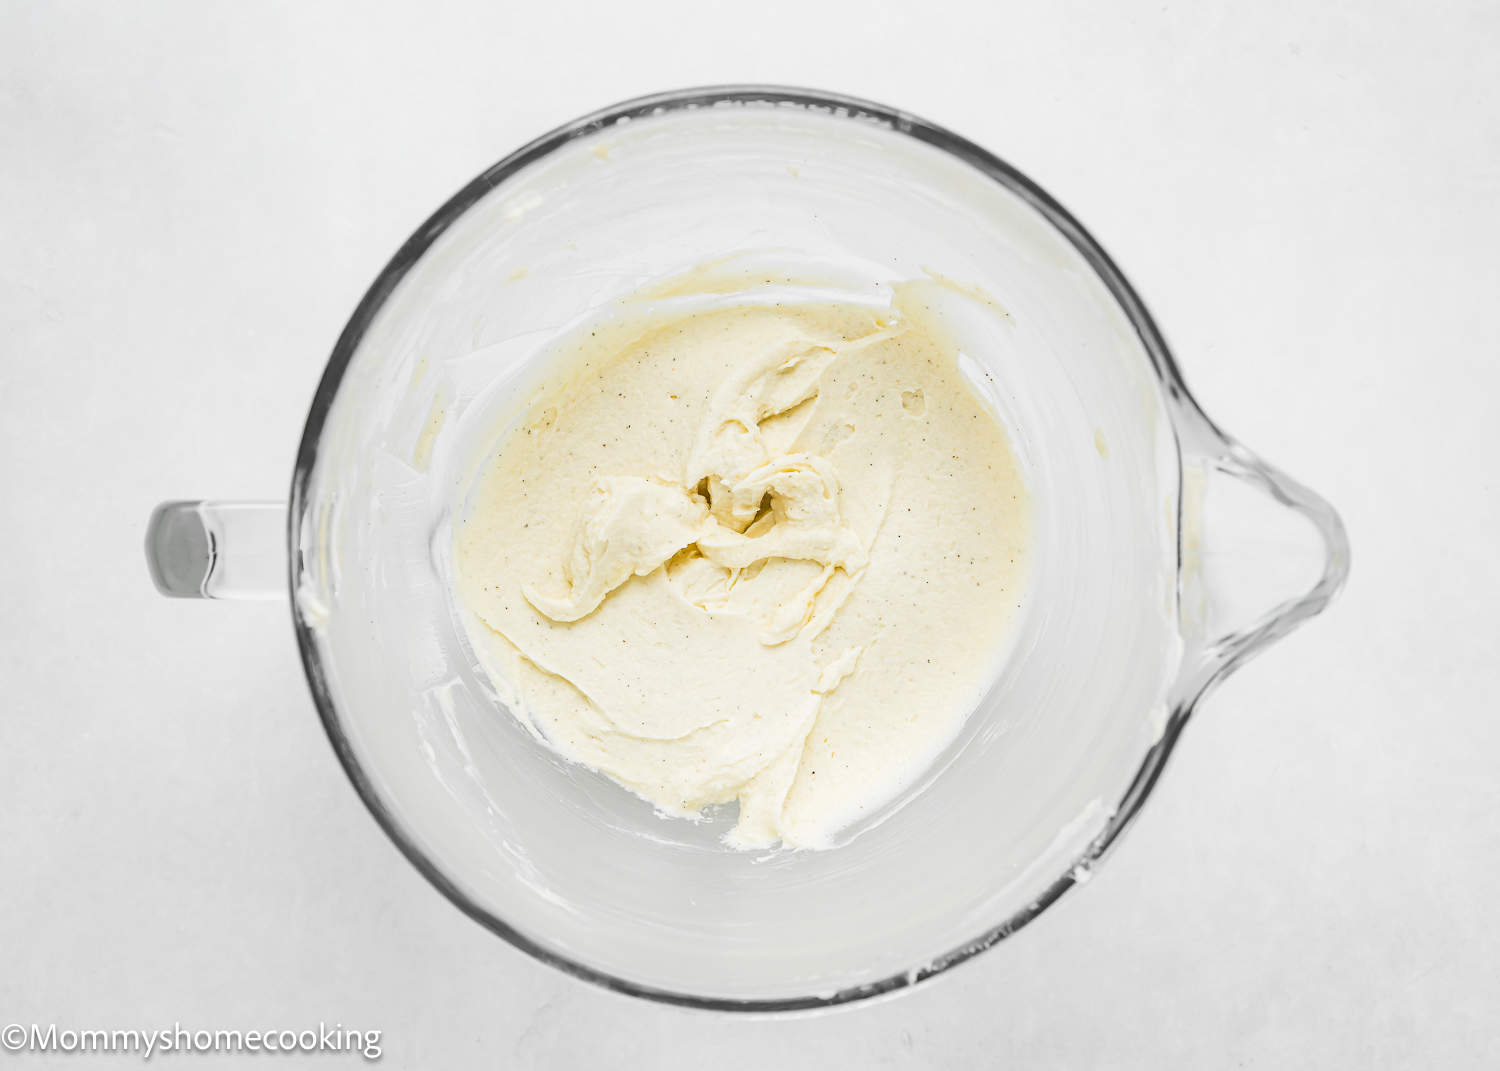 wet ingredients creamed together to make Eggless Sugar Cookie dough in a stand mixer bowl.